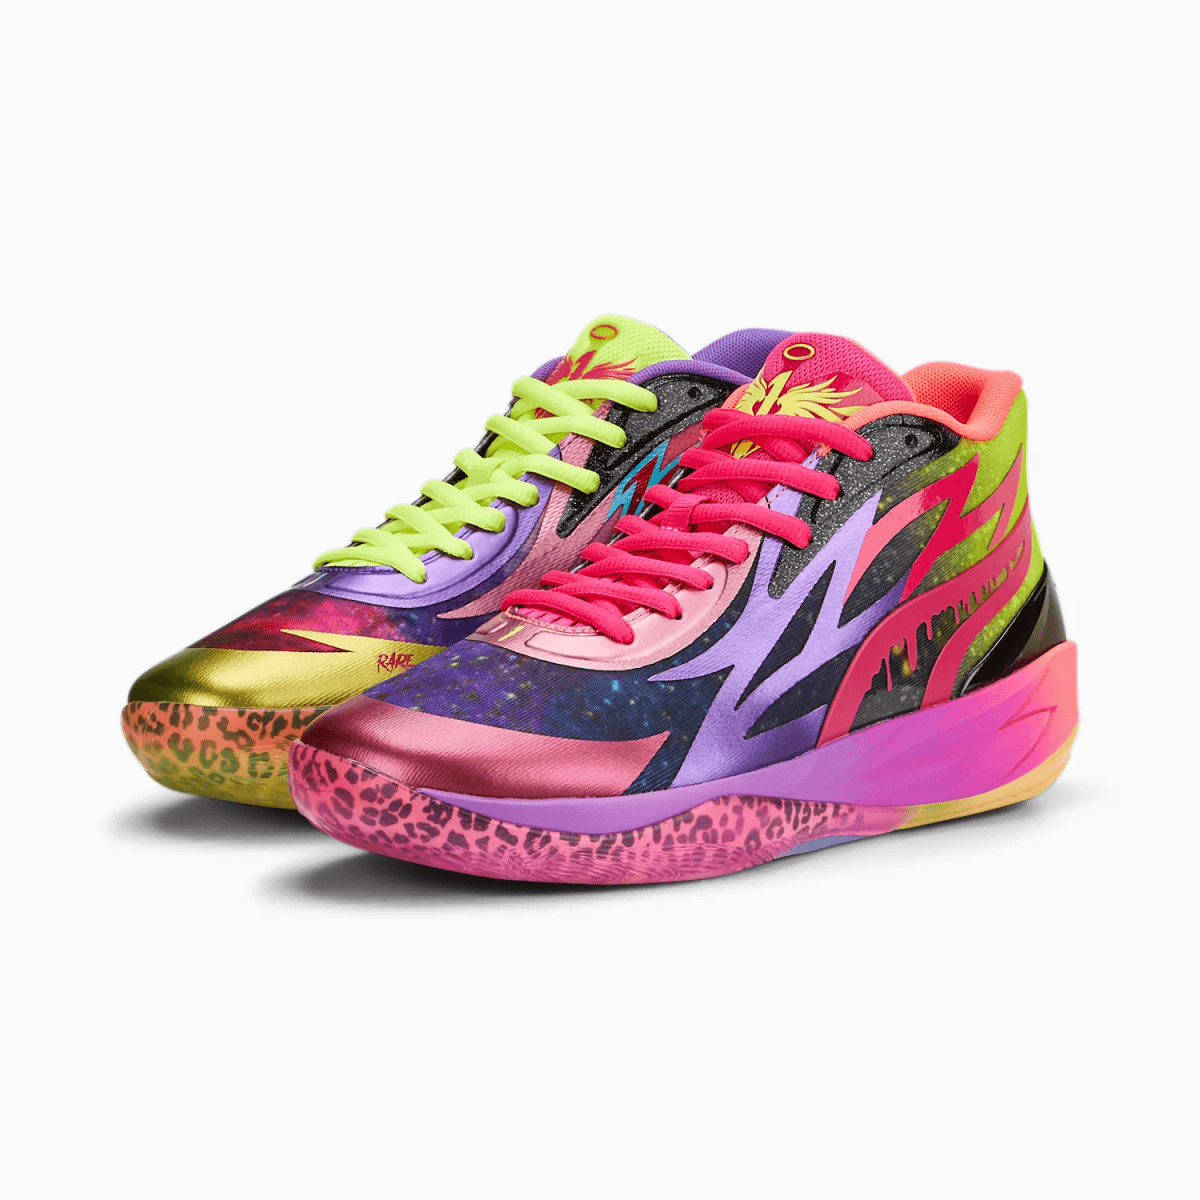 The Puma MB.02 Be You Is One Of LaMelo Balls Wildest Sneakers